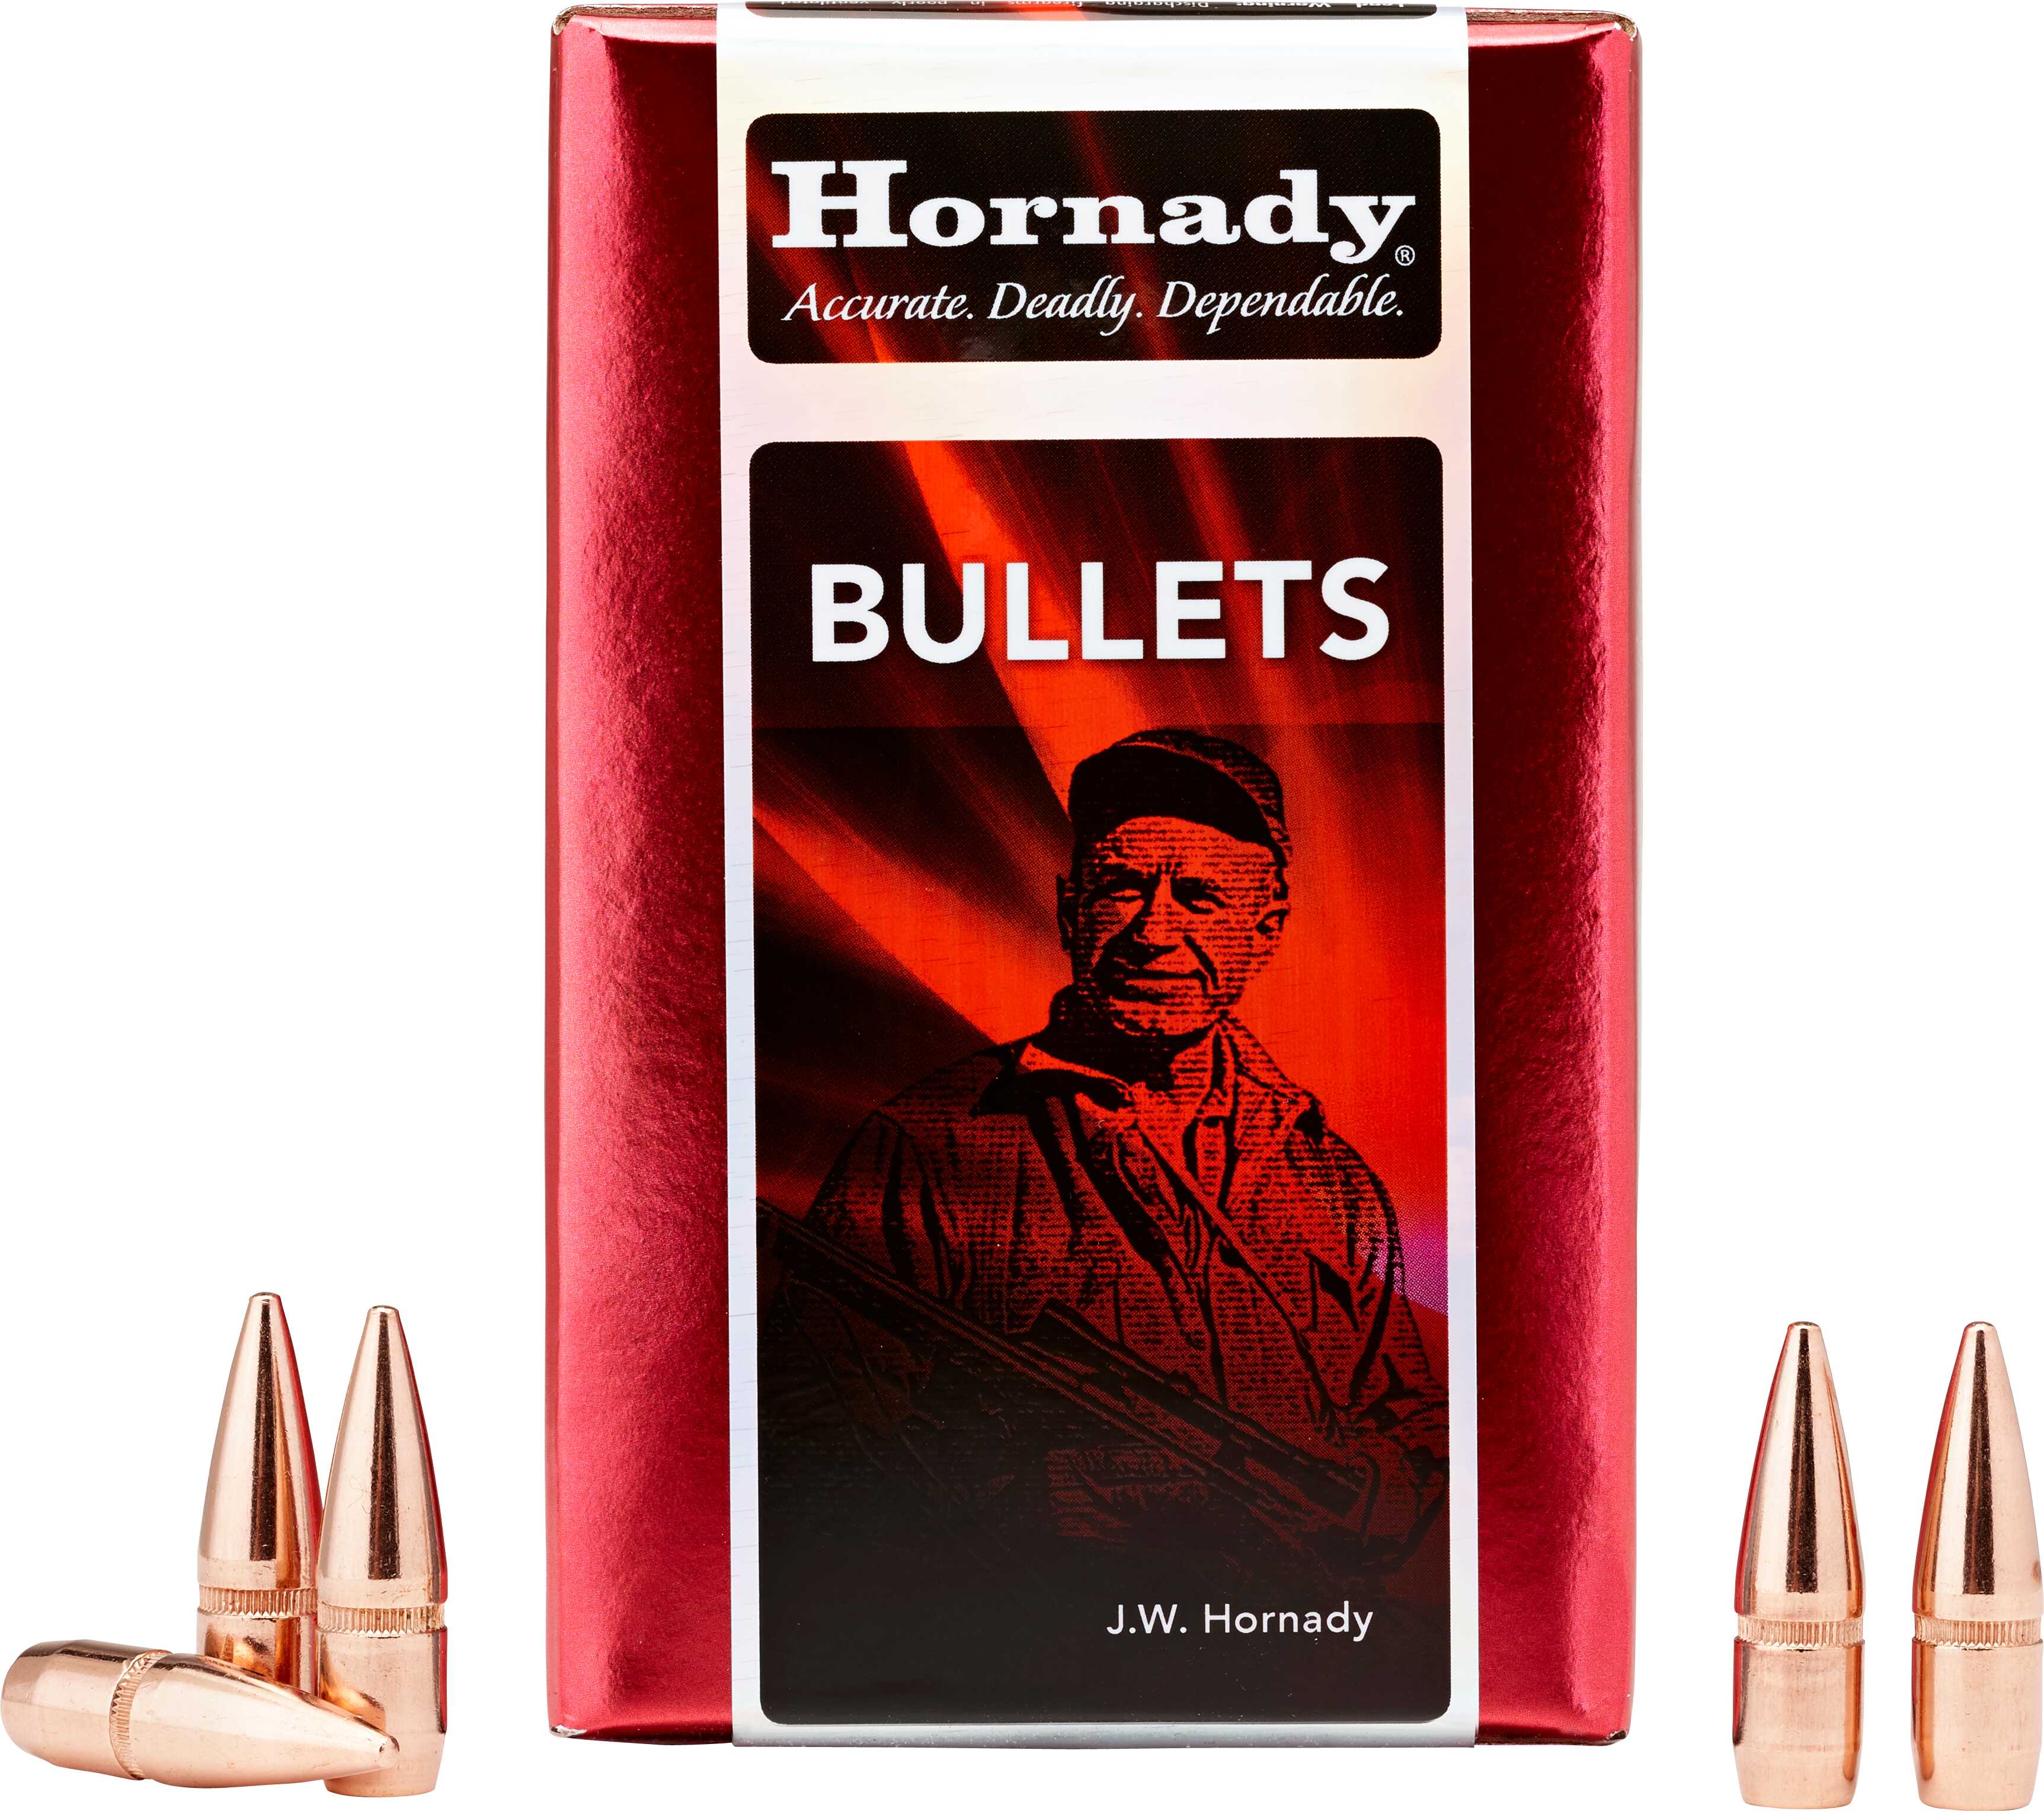 Hornady 7.62 (.310) 123 Grains FMJ Bullets 2800/Box (Reloading Componets, Not Live Ammo)